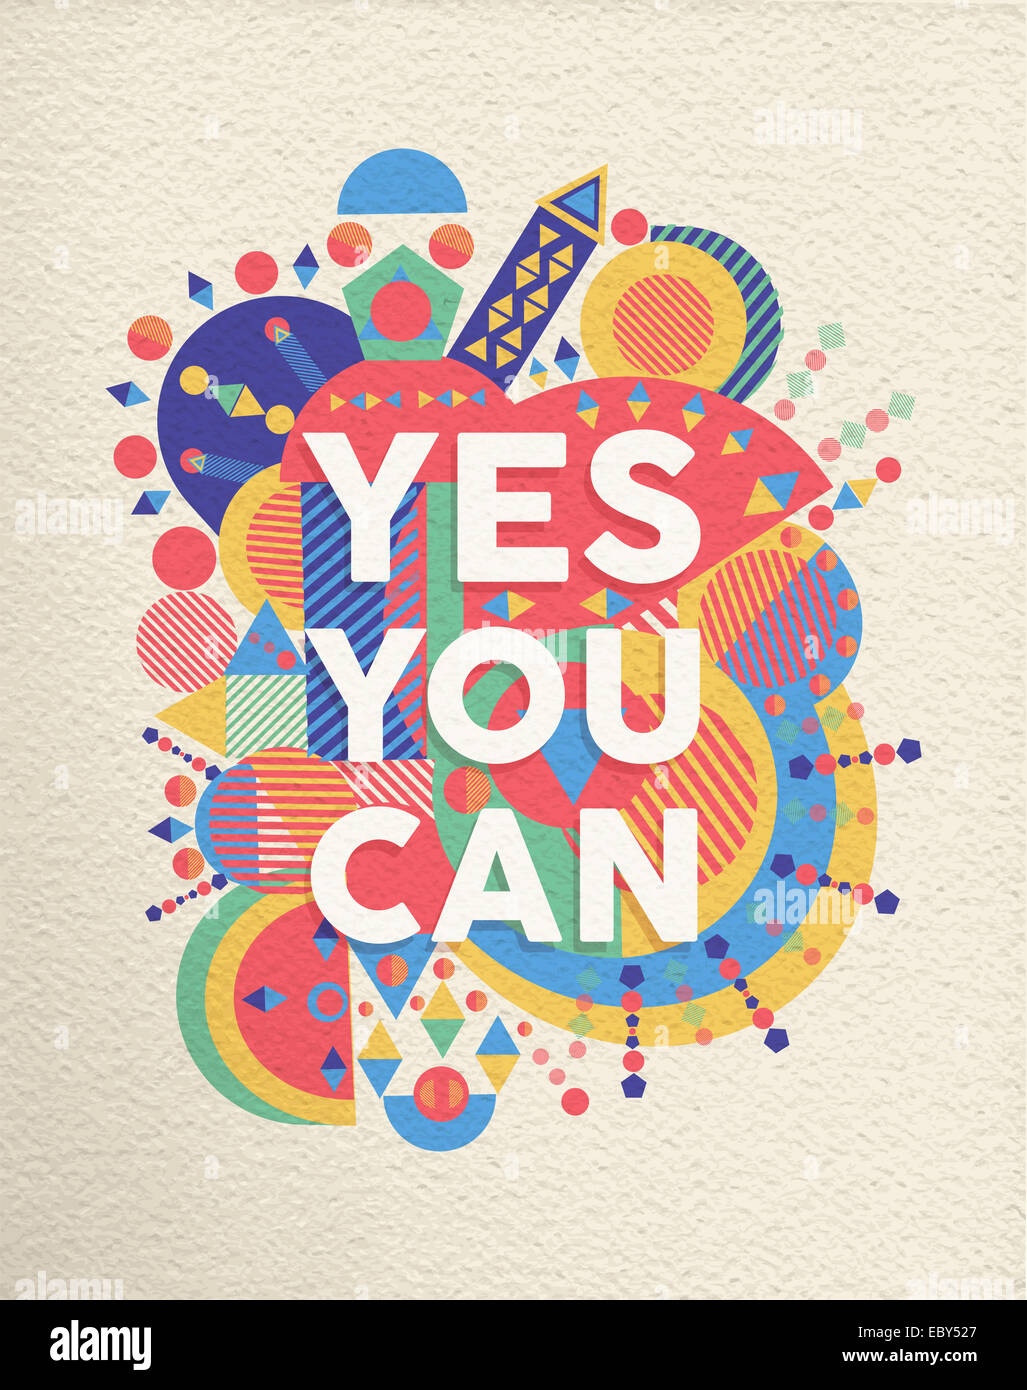 https://c8.alamy.com/comp/EBY527/yes-you-can-colorful-typographical-poster-inspirational-motivation-EBY527.jpg